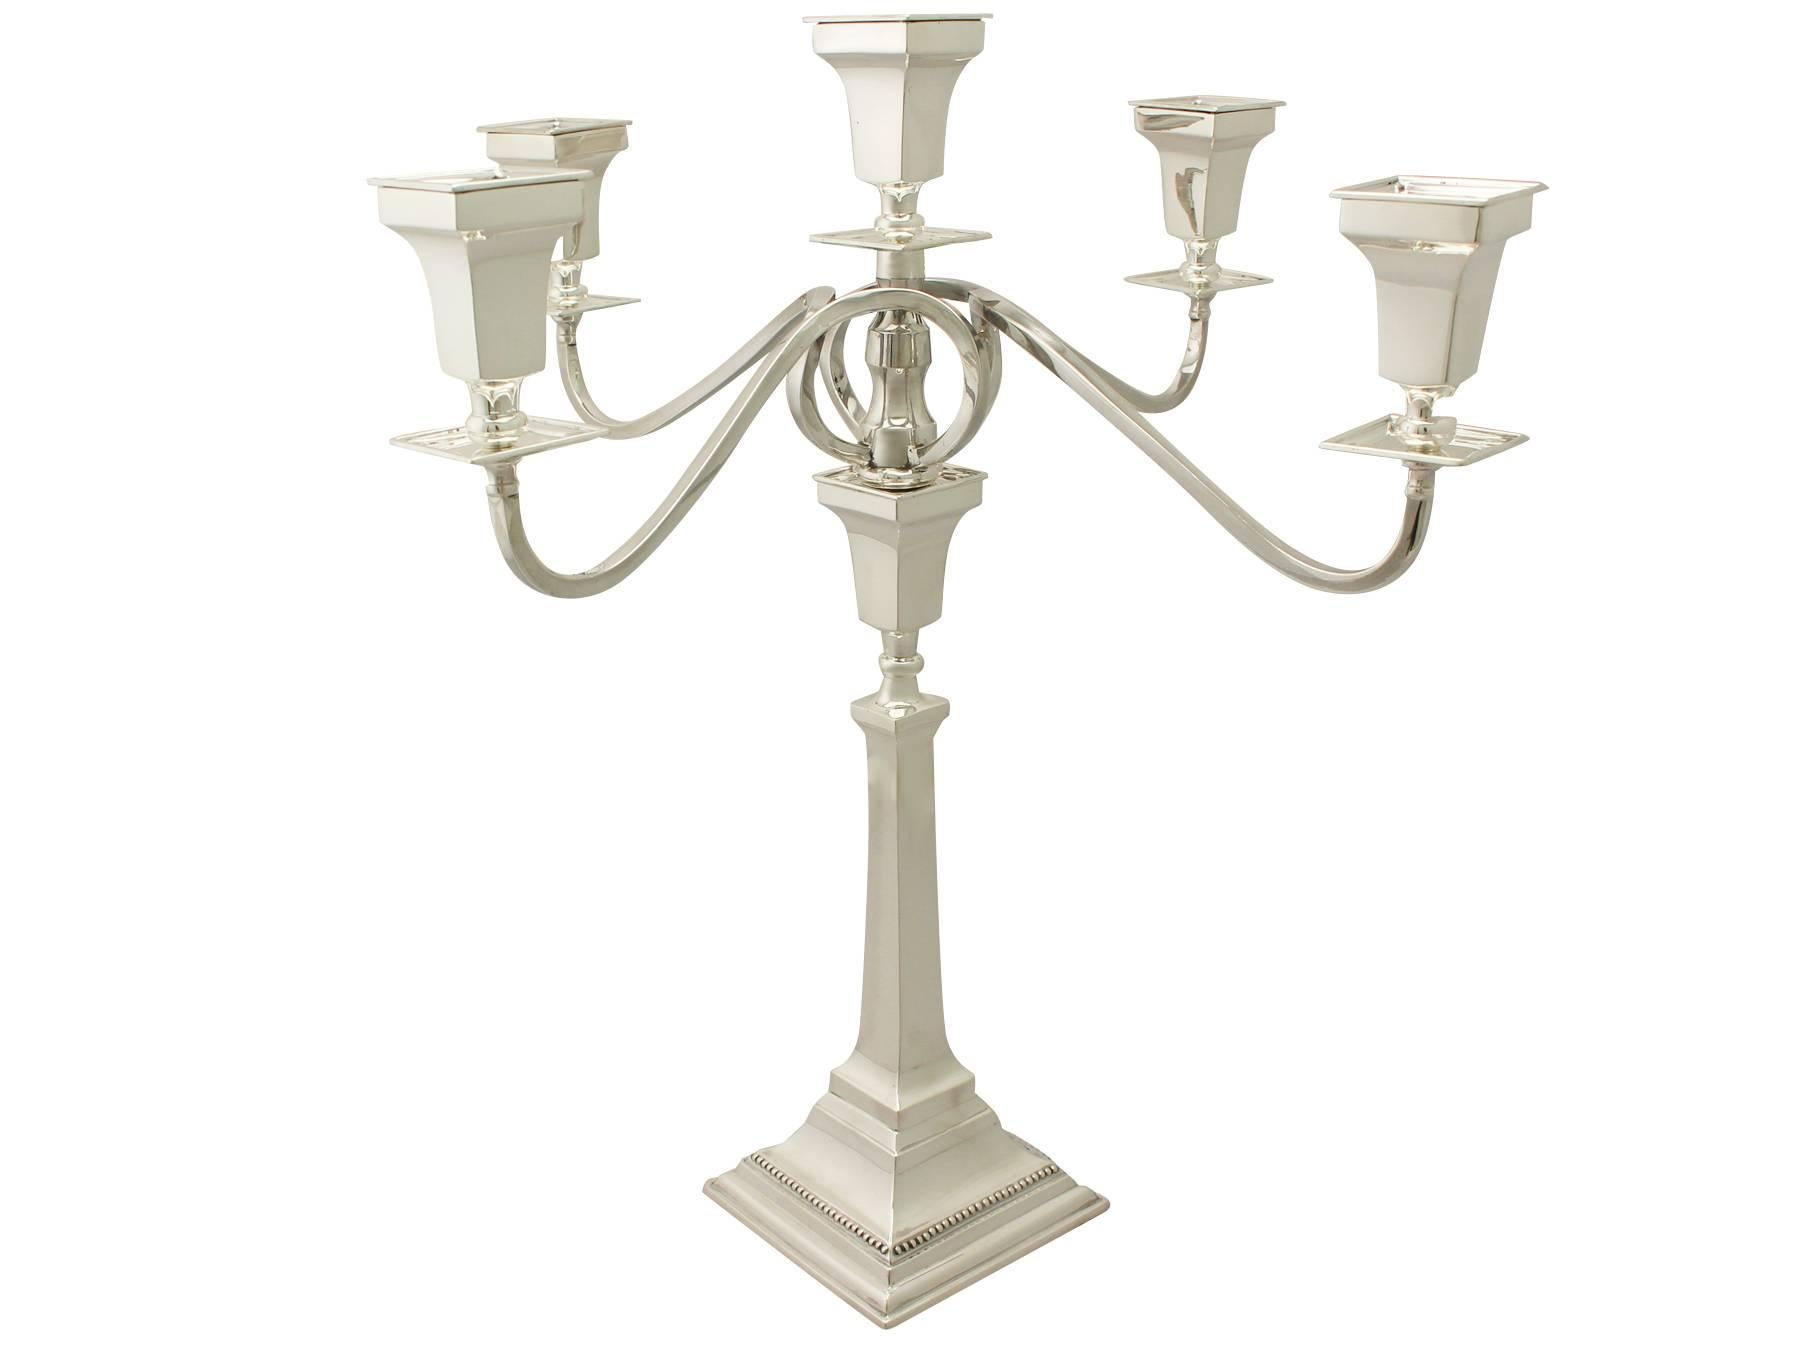 An exceptional, fine and impressive, large antique George VI English sterling silver five-light candelabrum; an addition to our ornamental silverware collection.

This exceptional antique George VI sterling silver five light candelabrum has plain